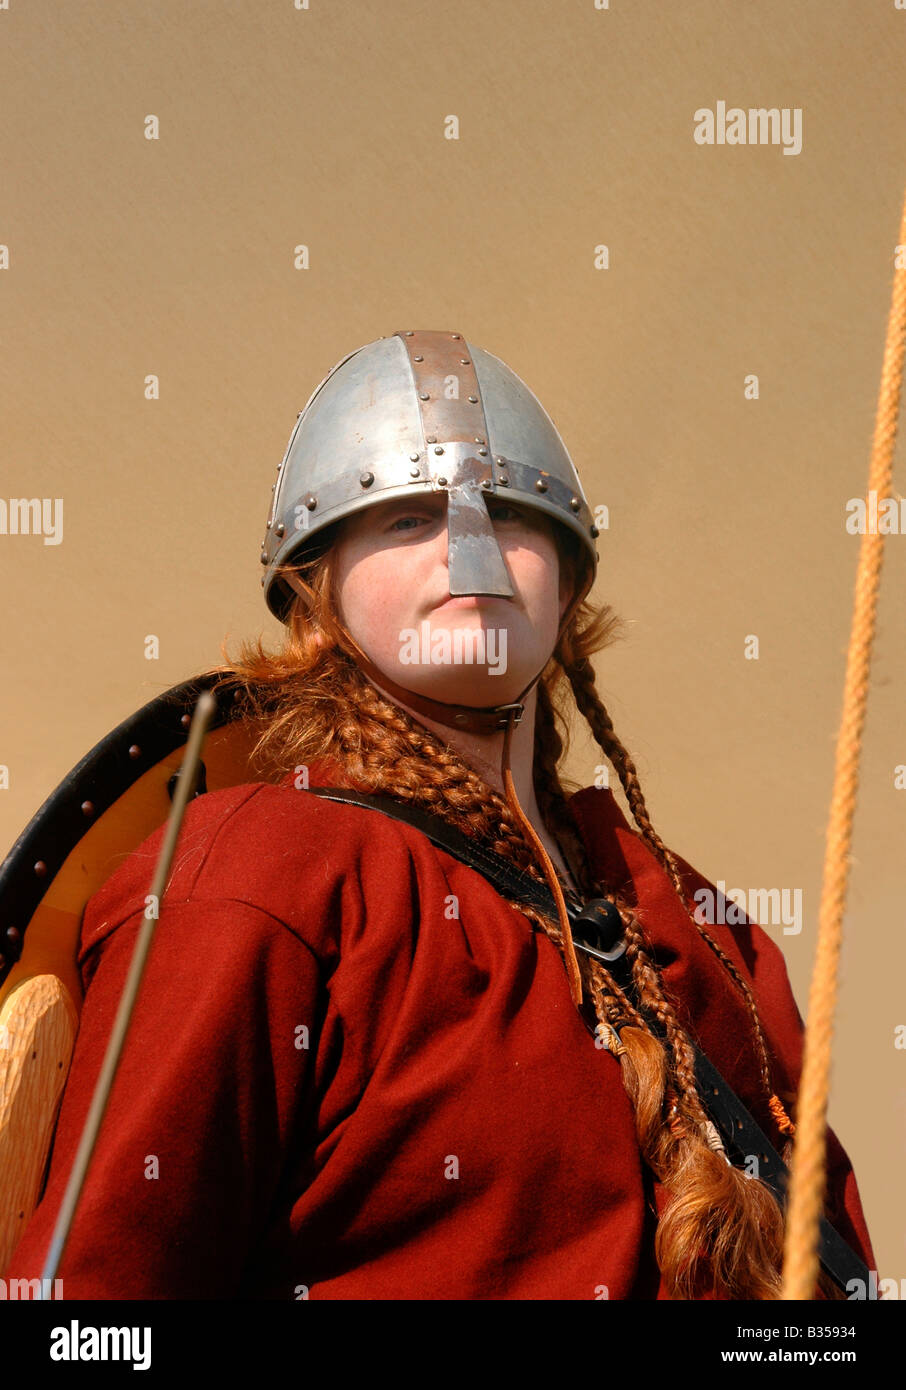 A portrait of a woman/girl belonging to a viking reenactment group dressed in period costume  - ready for battle. Stock Photo